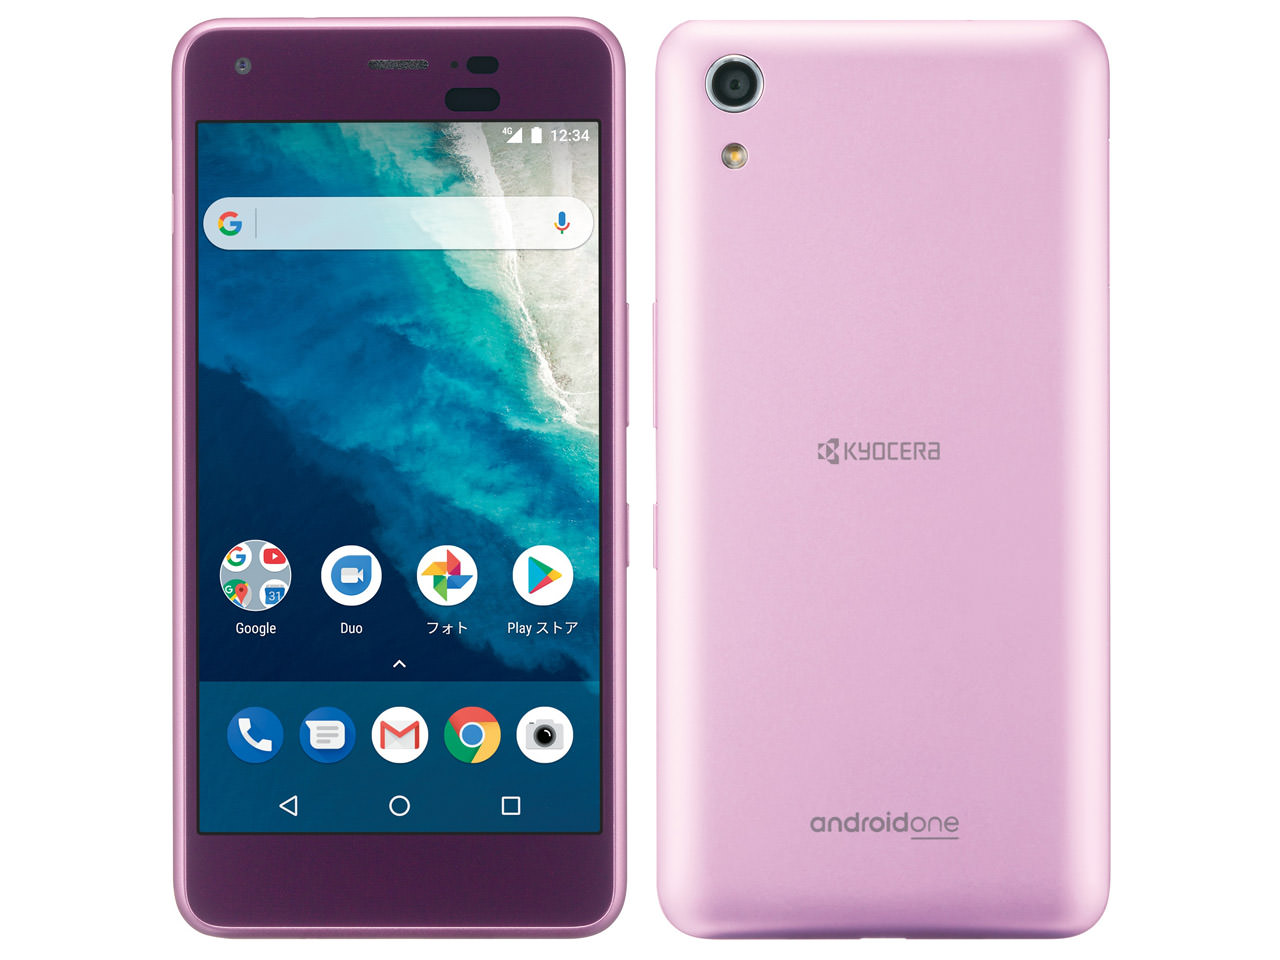 Android One S4 ワイモバイル [ピンク]